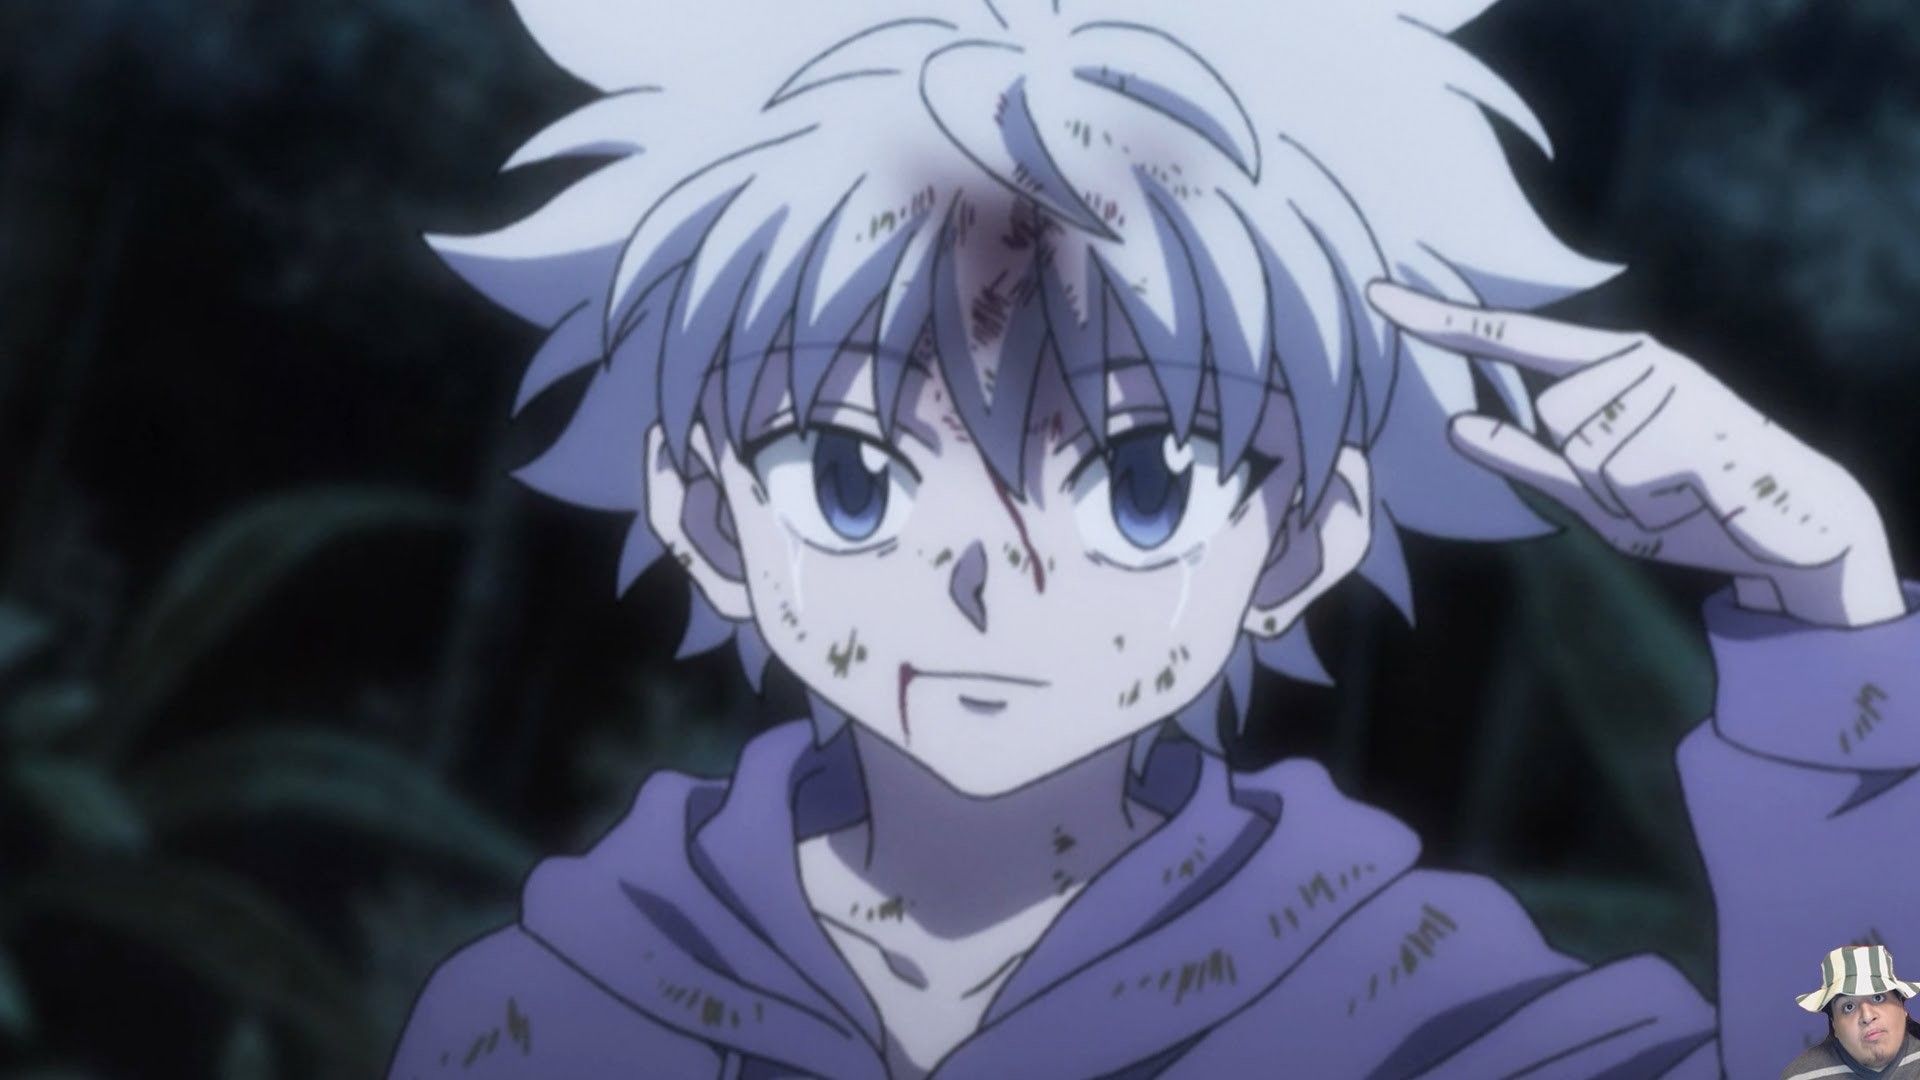 Killua Wallpapers Hd posted by Michelle Johnson